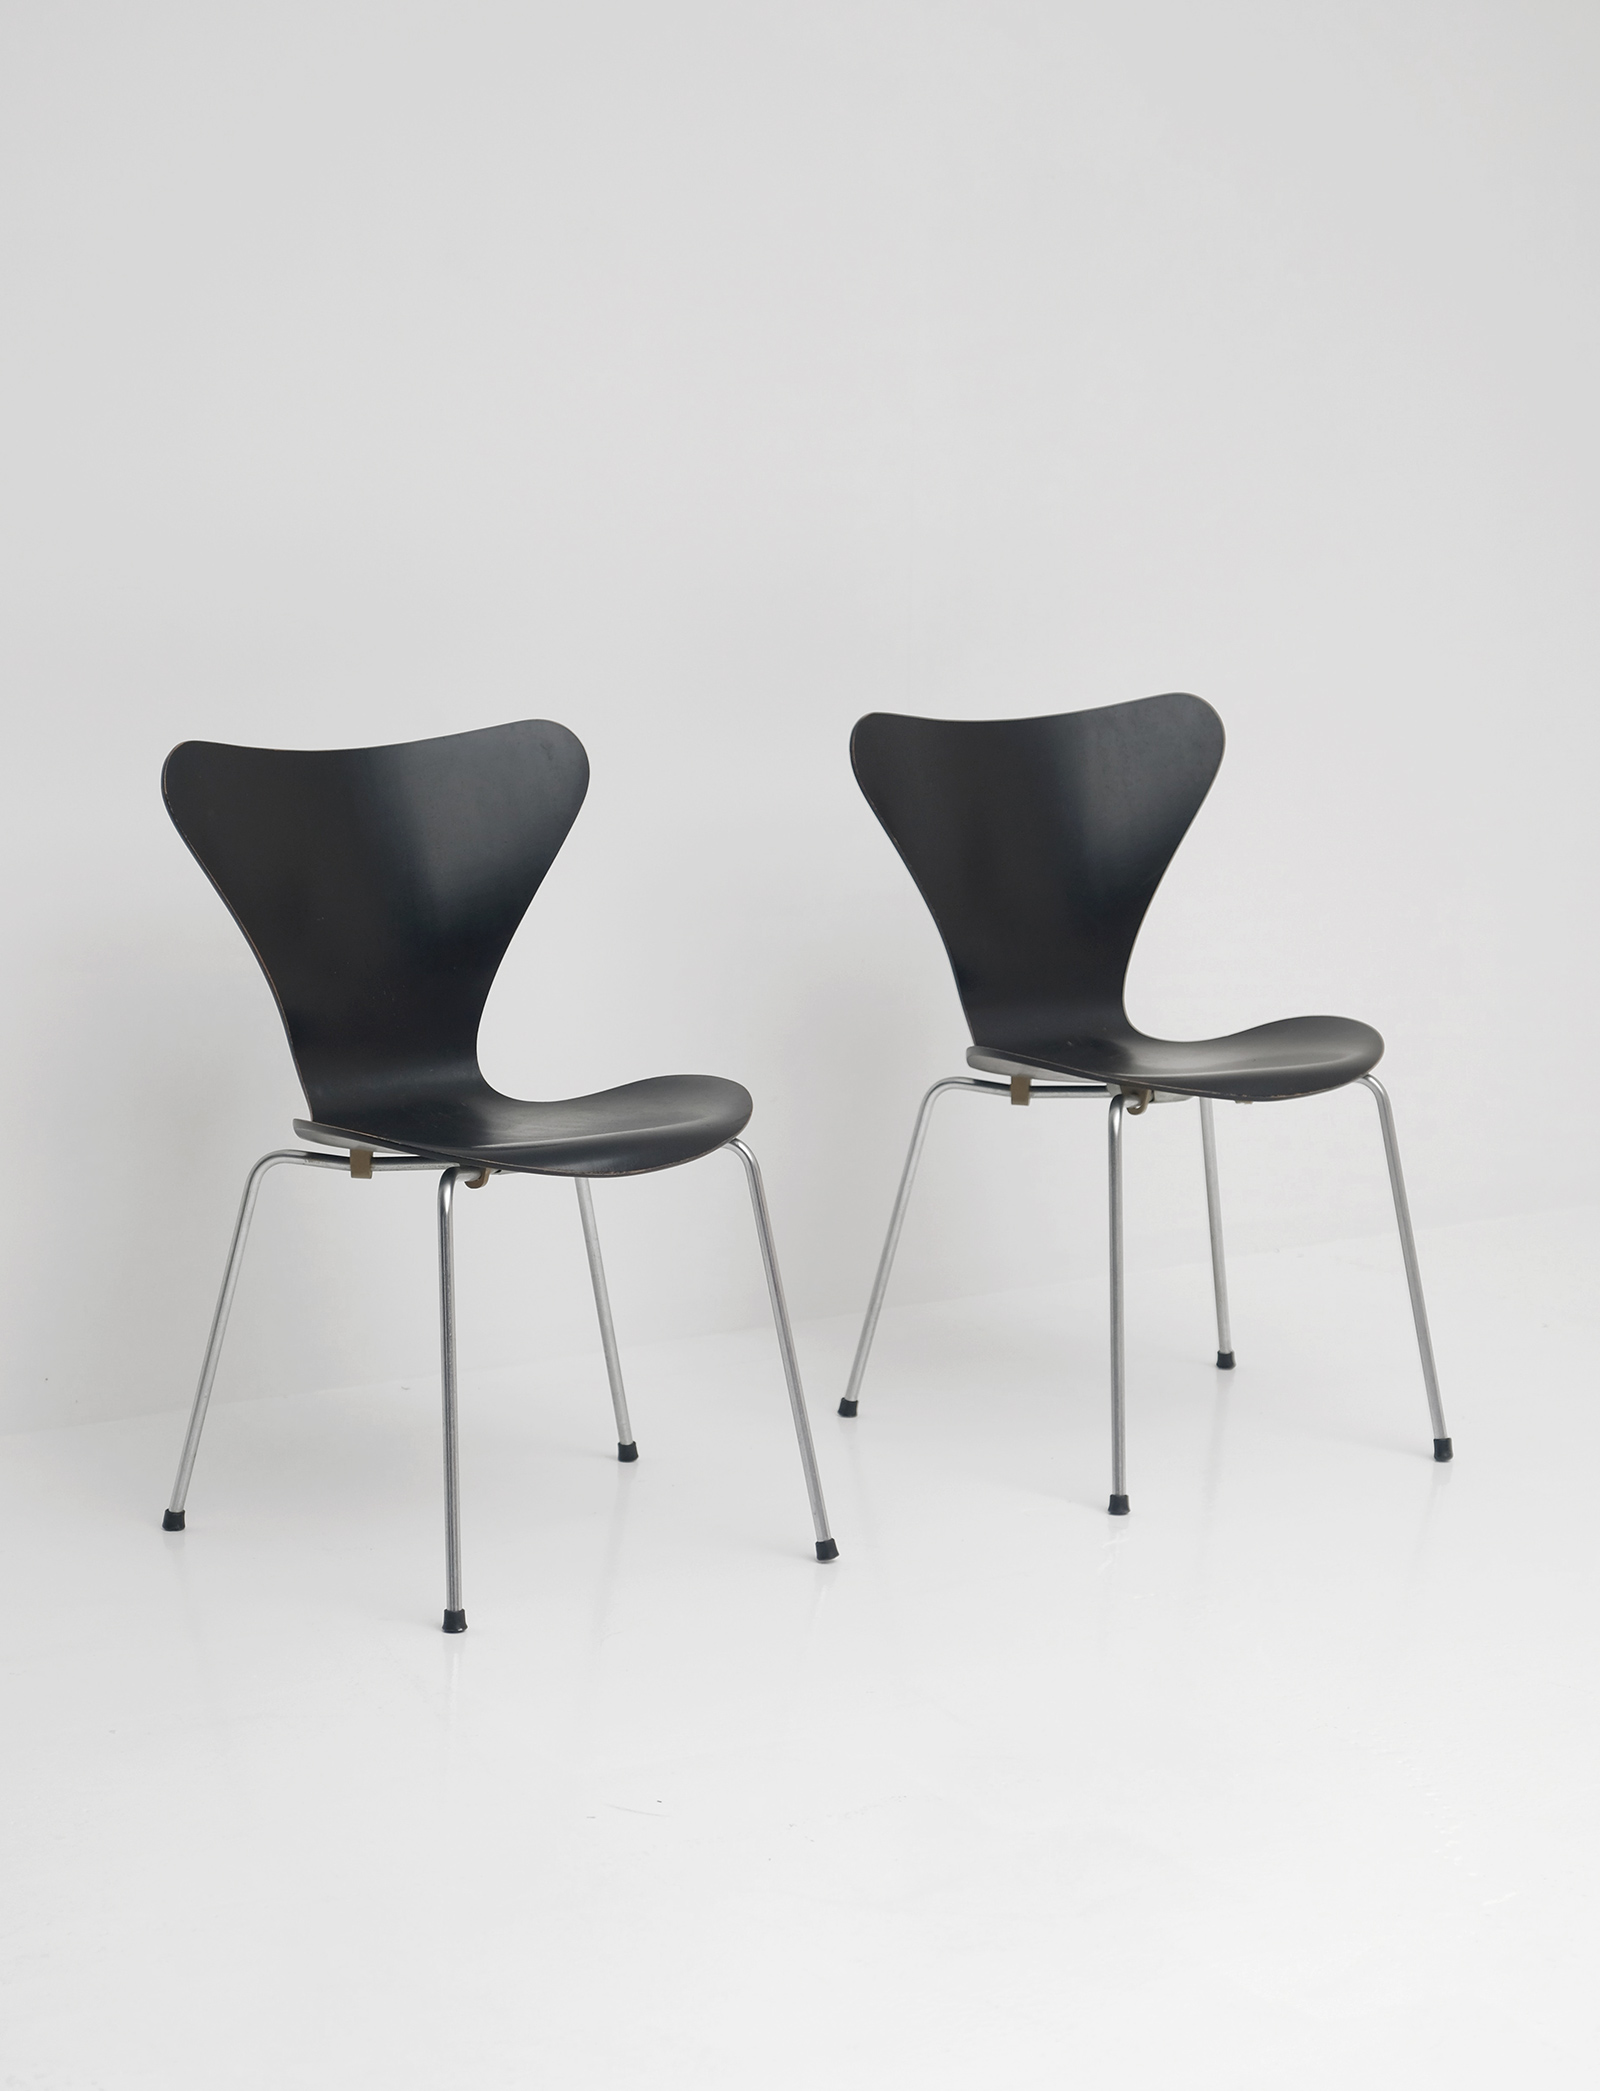 3107 Series Butterfly Chair by Arne Jacobsen for Fritz Hansenimage 6